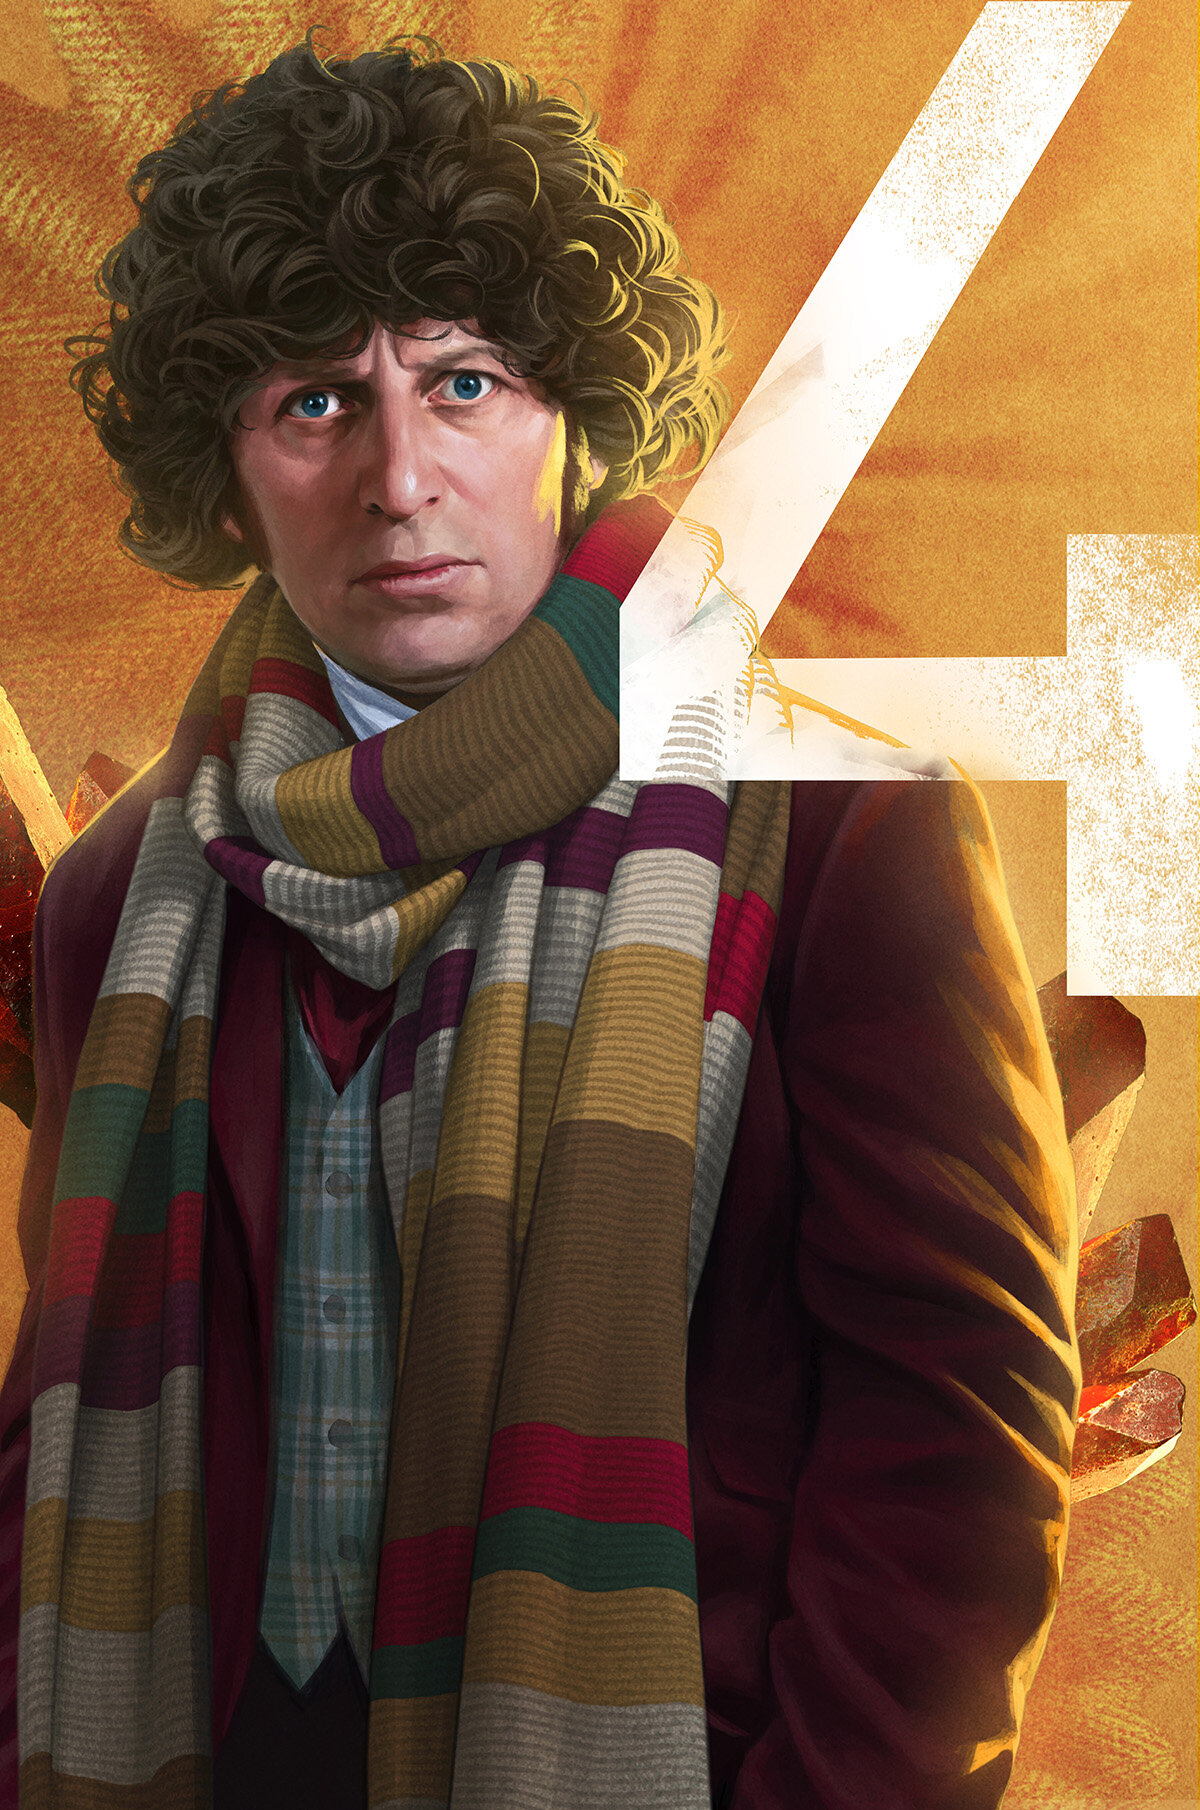 Dr_Who_TomBaker_RGB_FY_Test_01_1200px.jpg